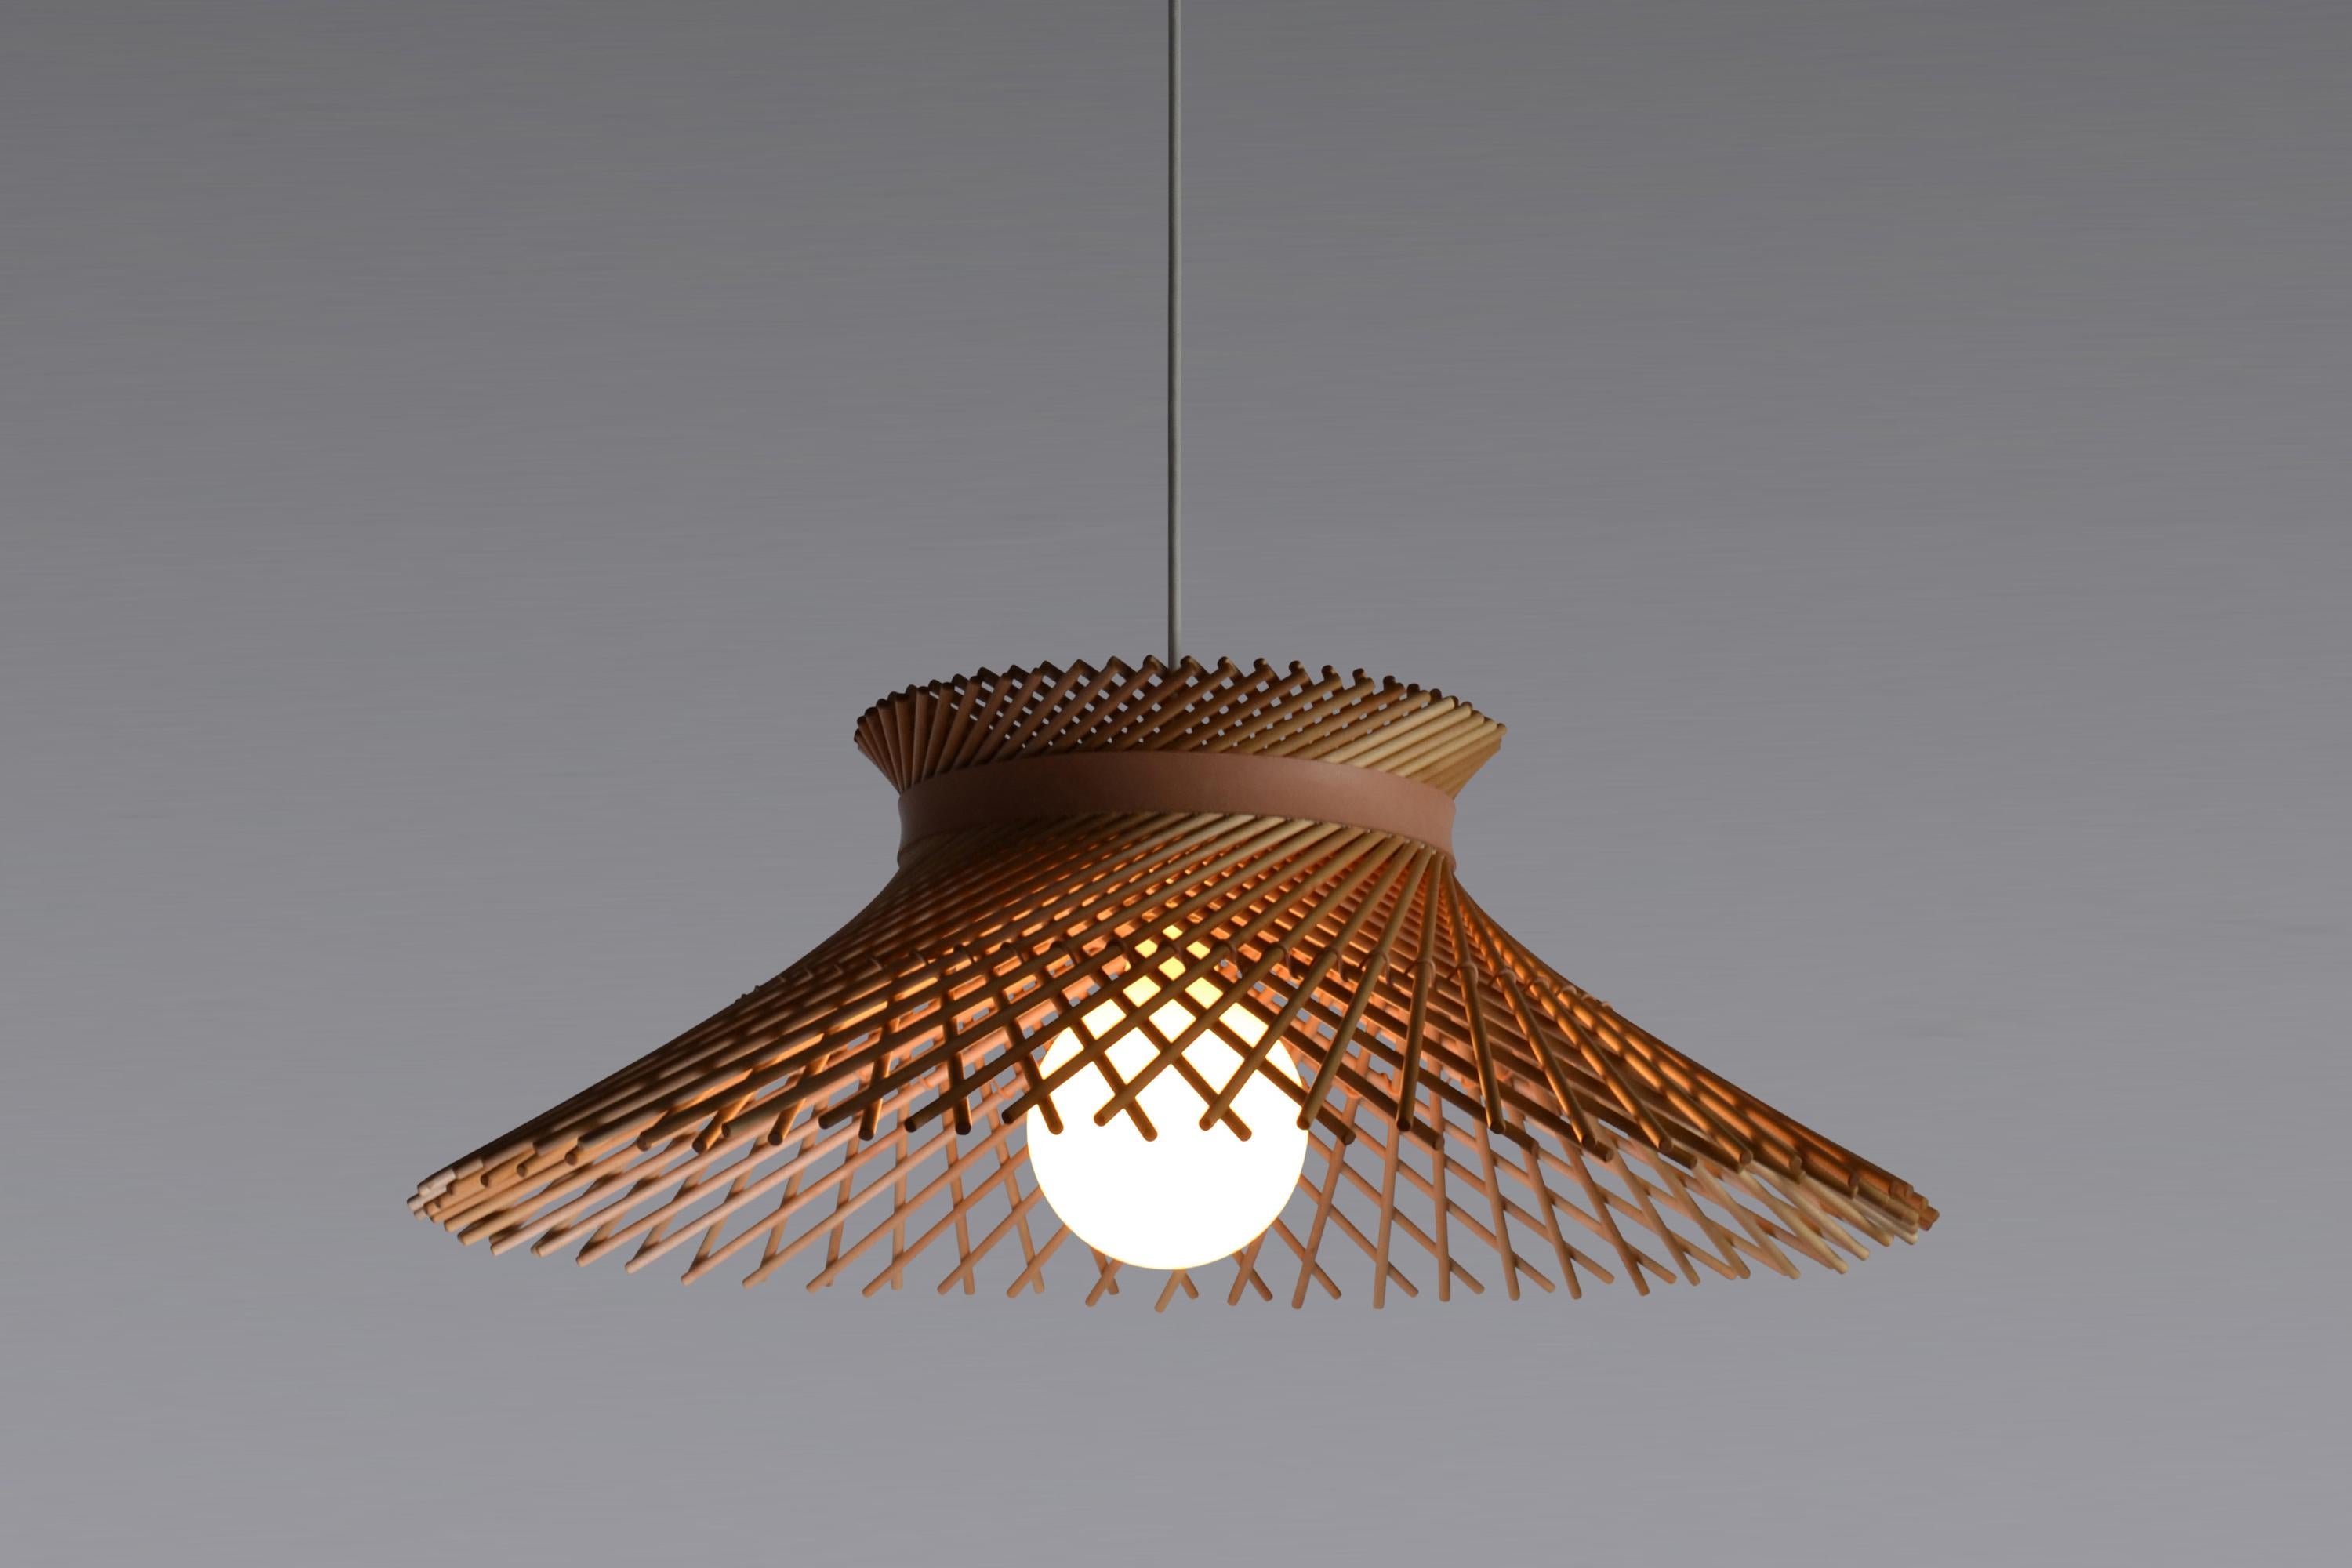 The Mooda Pendants celebrate the form of the Mooda as a whole and transport it directly from the floor to the ceiling. Illuminated from within and creating a moody yet light-hearted atmosphere, the Mooda pendants have an exceptional presence in the